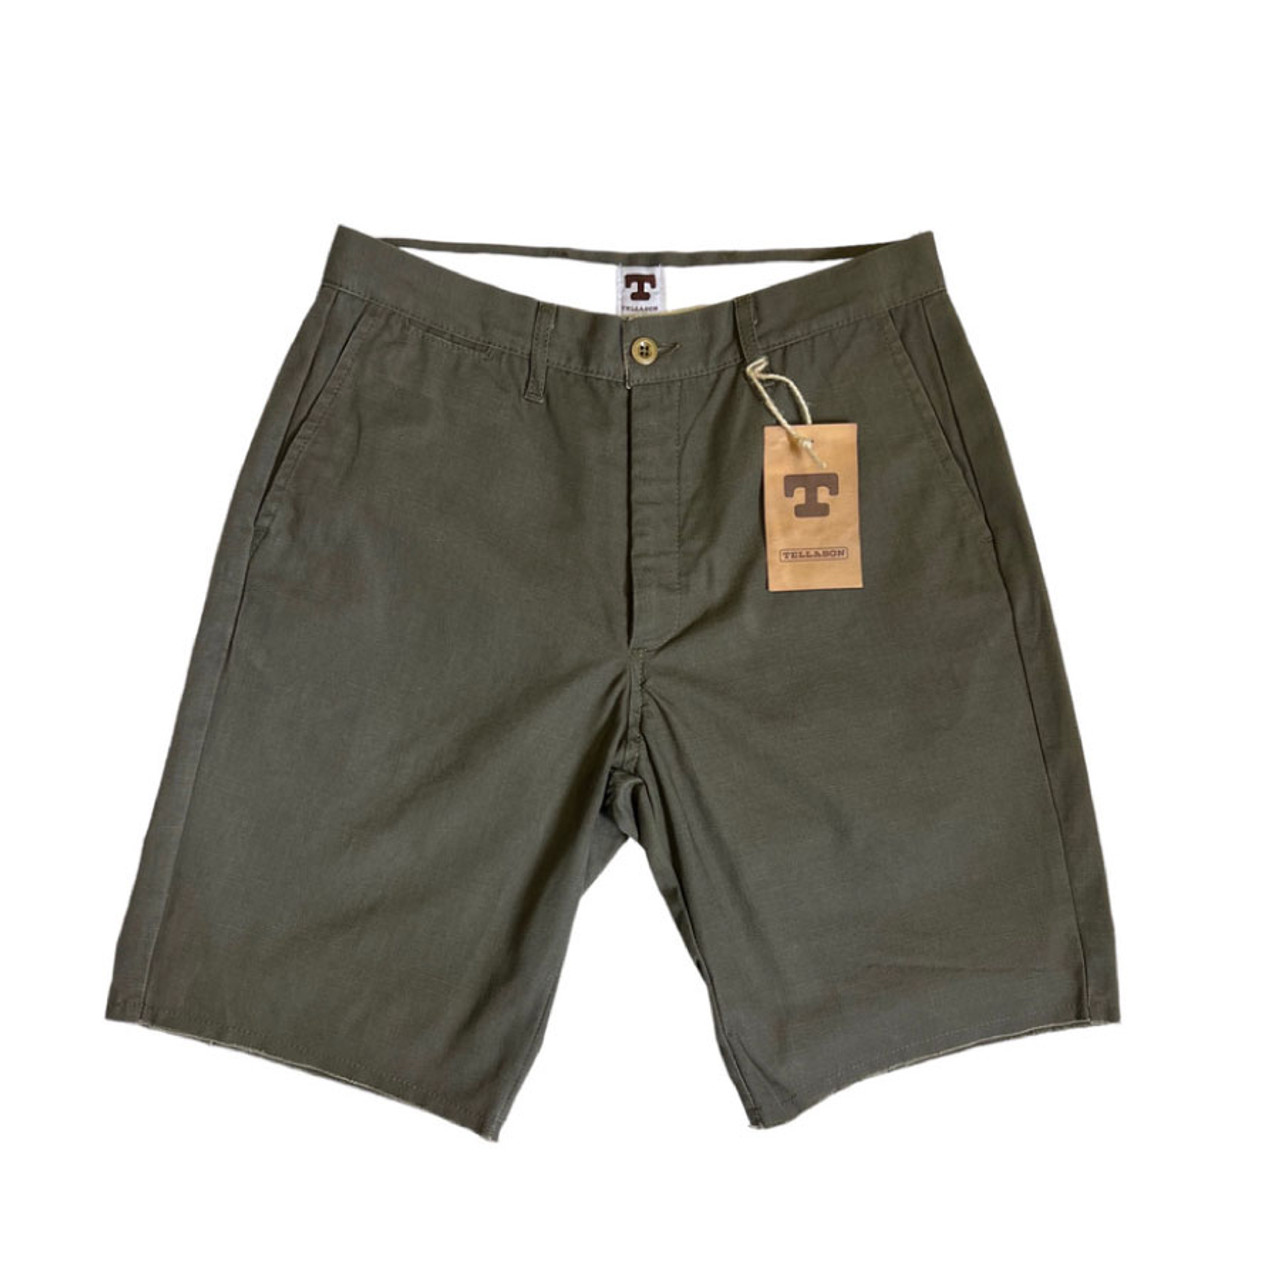 CUT OFF SHORTS COTTON RIPSTOP (OLIVE)